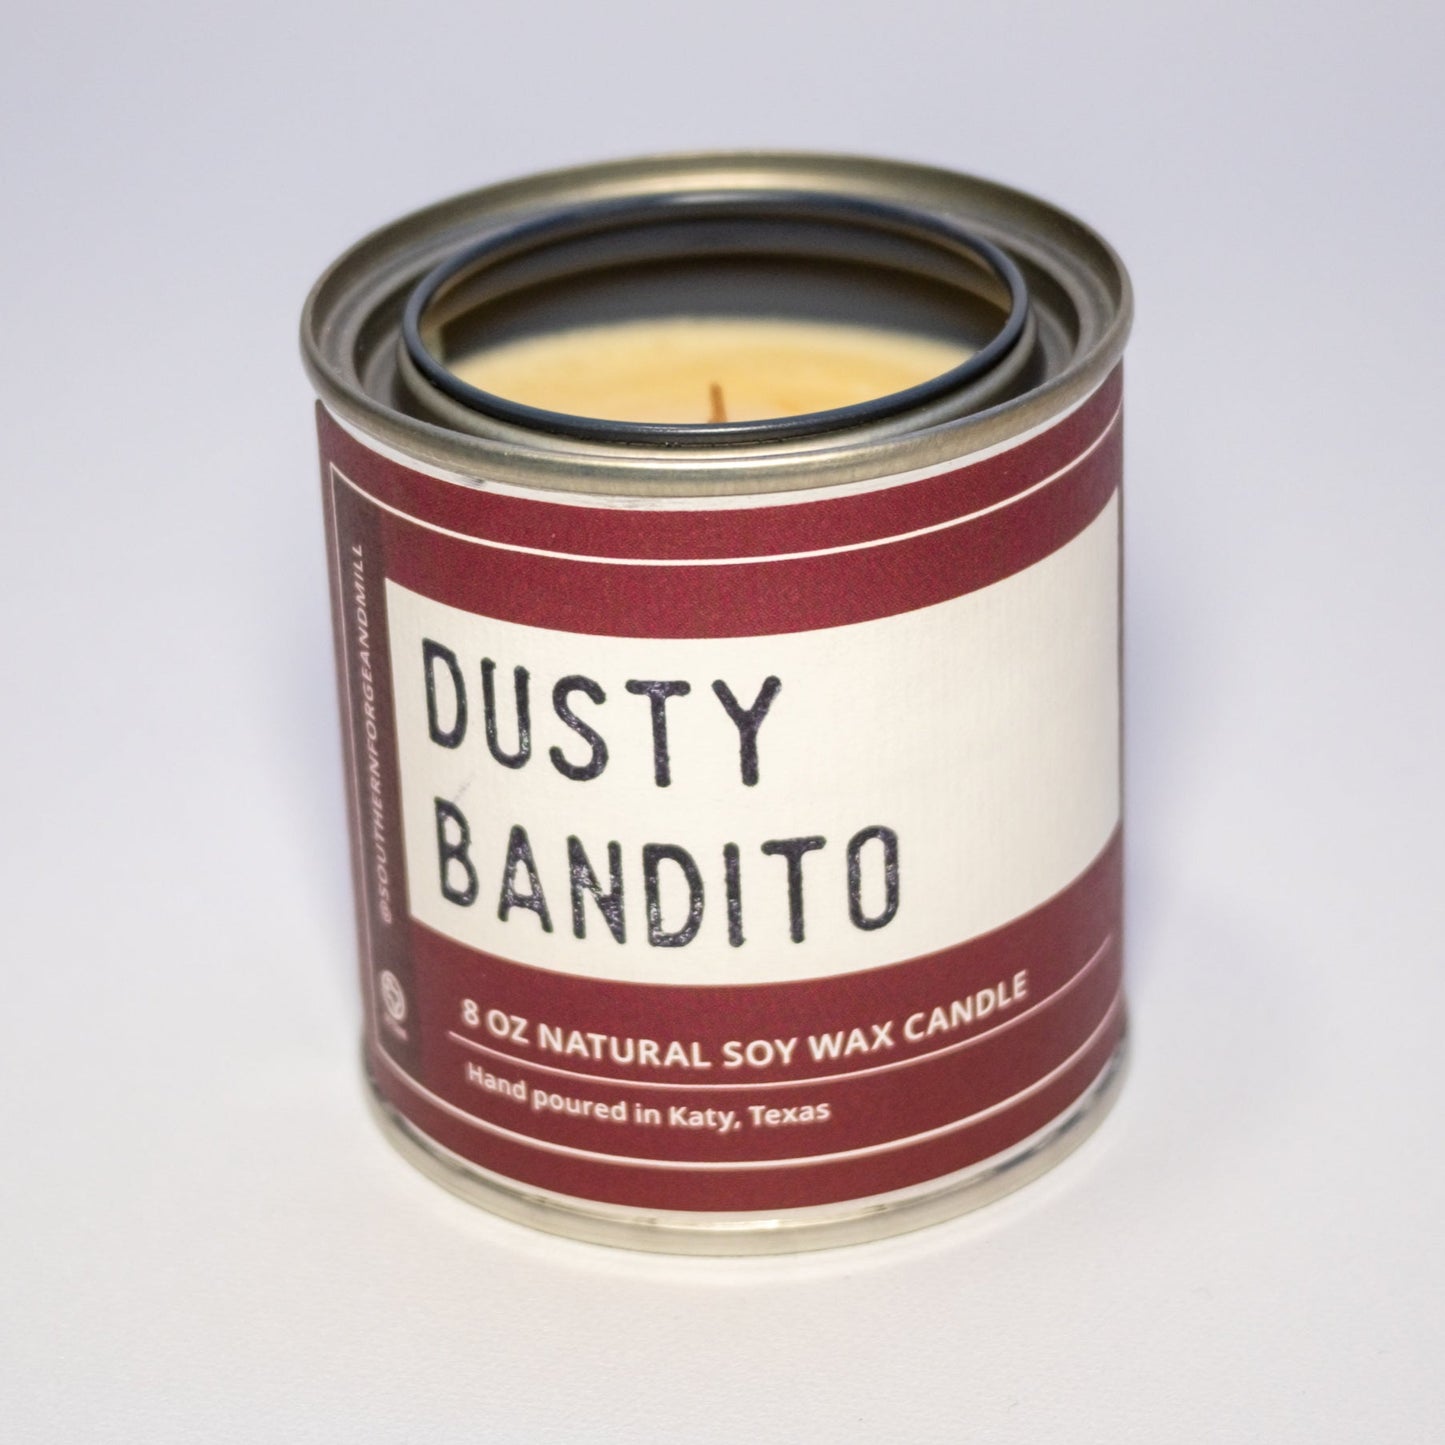 Dusty Bandito Soy Candle